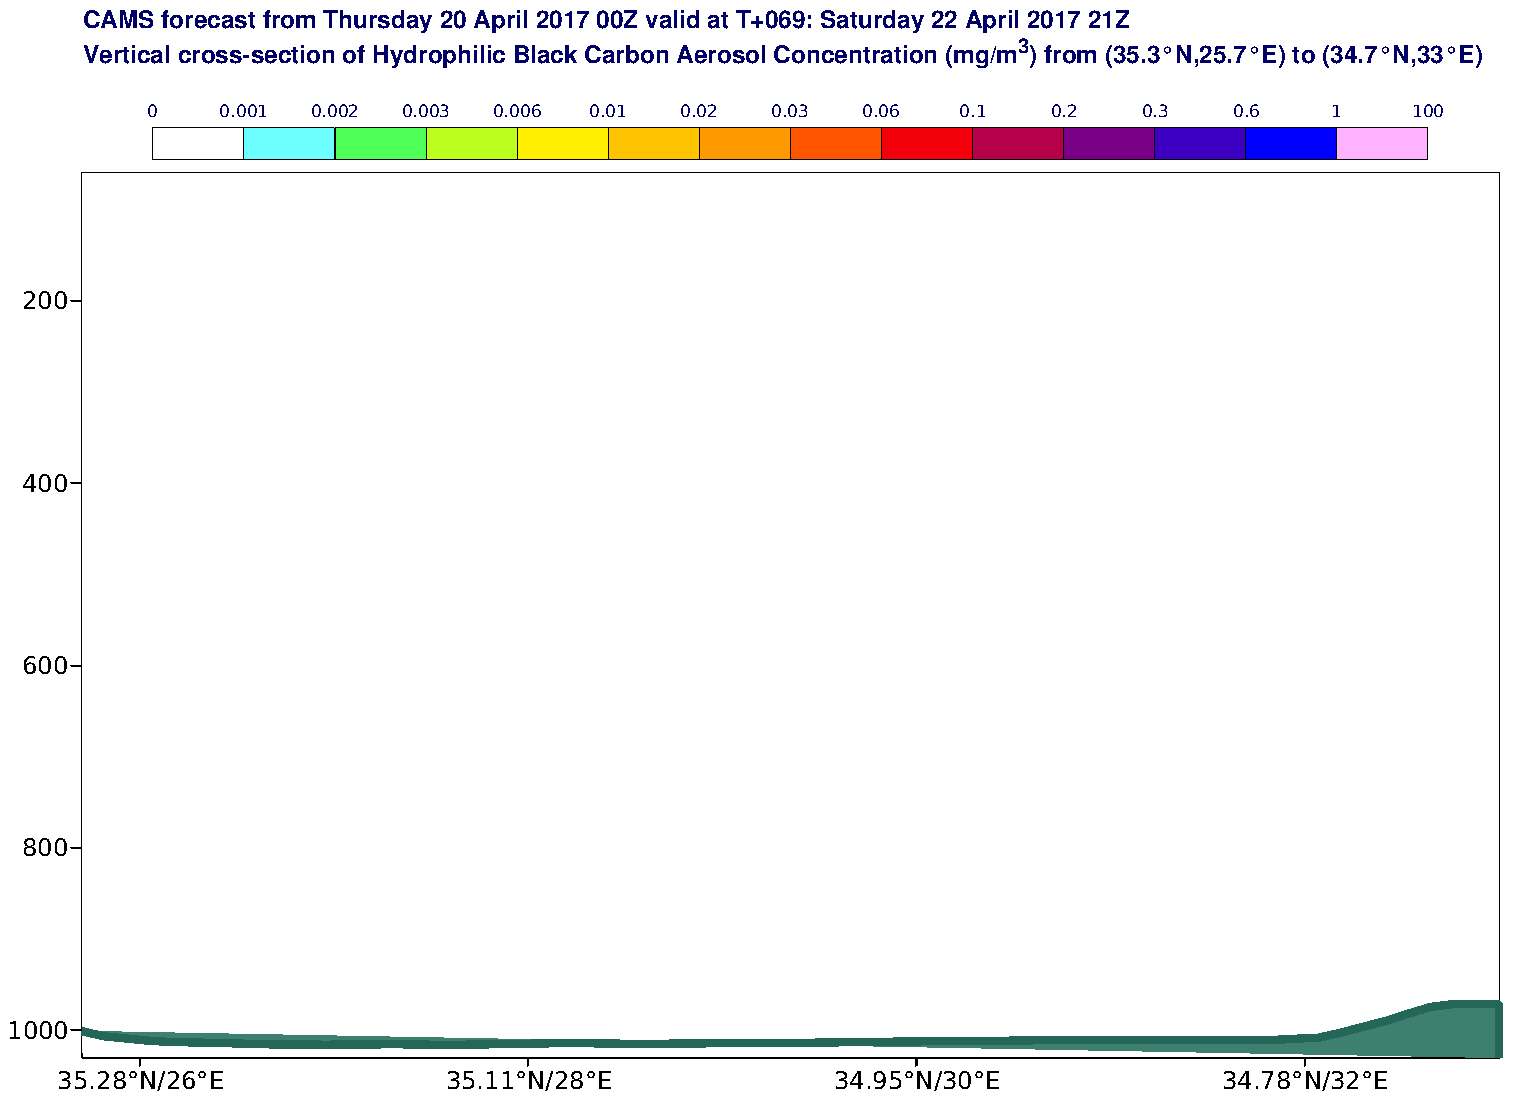 Vertical cross-section of Hydrophilic Black Carbon Aerosol Concentration (mg/m3) valid at T69 - 2017-04-22 21:00